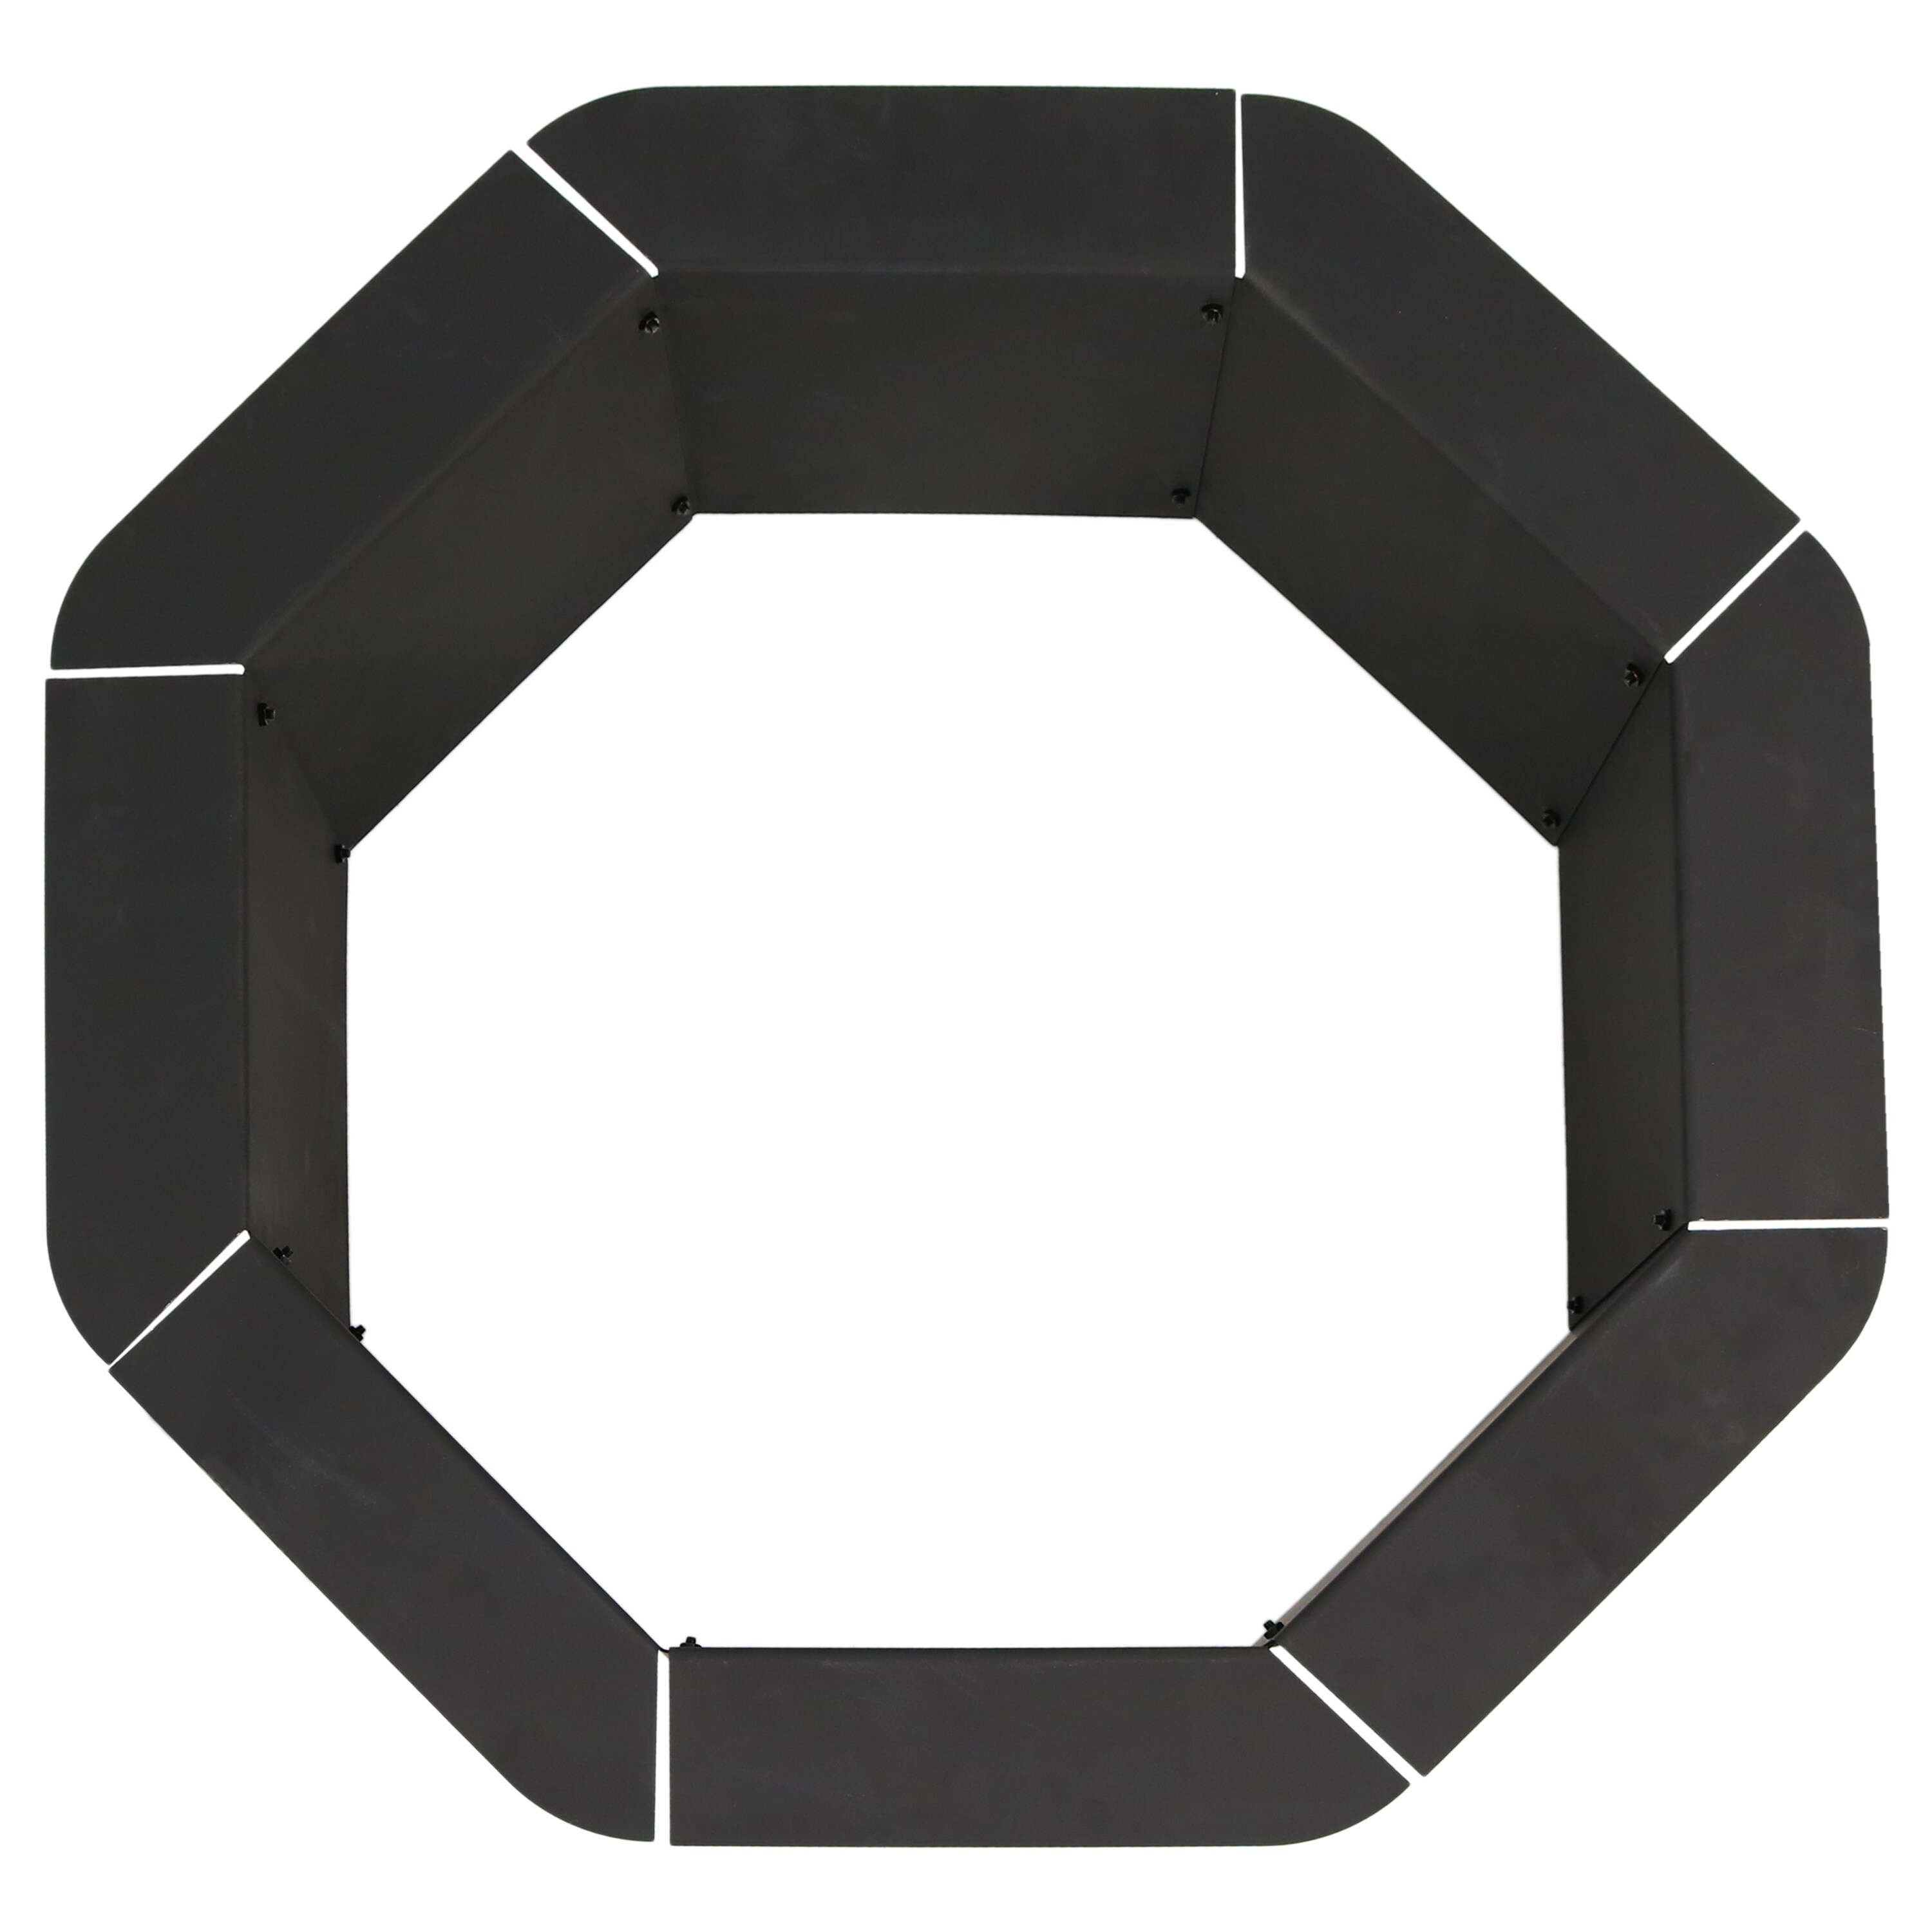 Sunnydaze Decor Octagon Fire Ring Insert for Patio or Camping- DIY Fire Pit  Rim Liner Above or In-Ground- Outdoor Heavy Duty 2.2mm Thick Steel- 38 -in